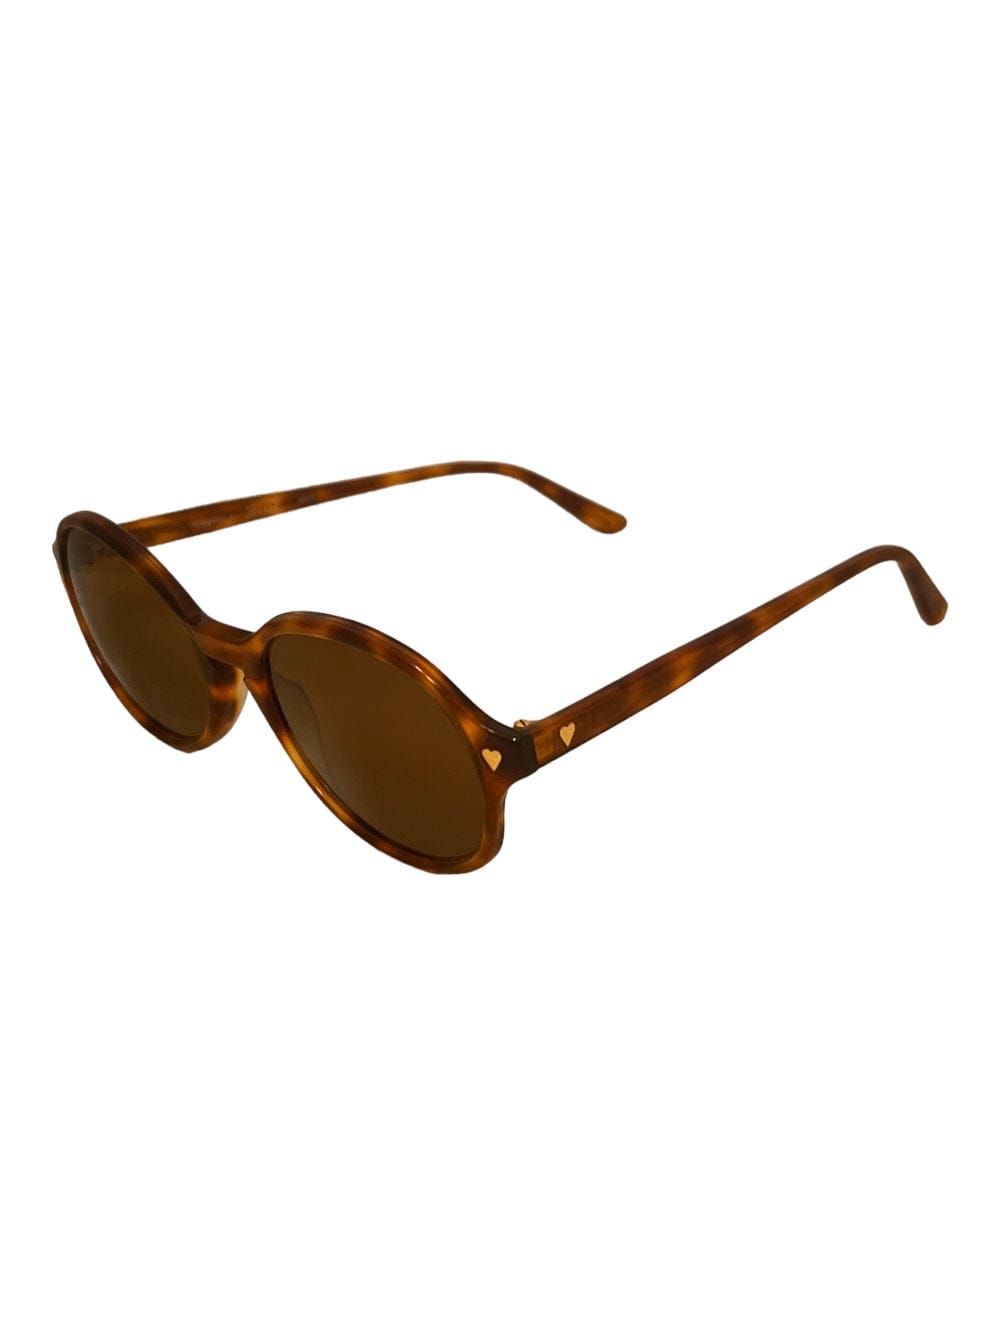 Moschino By Persol Sunglasses